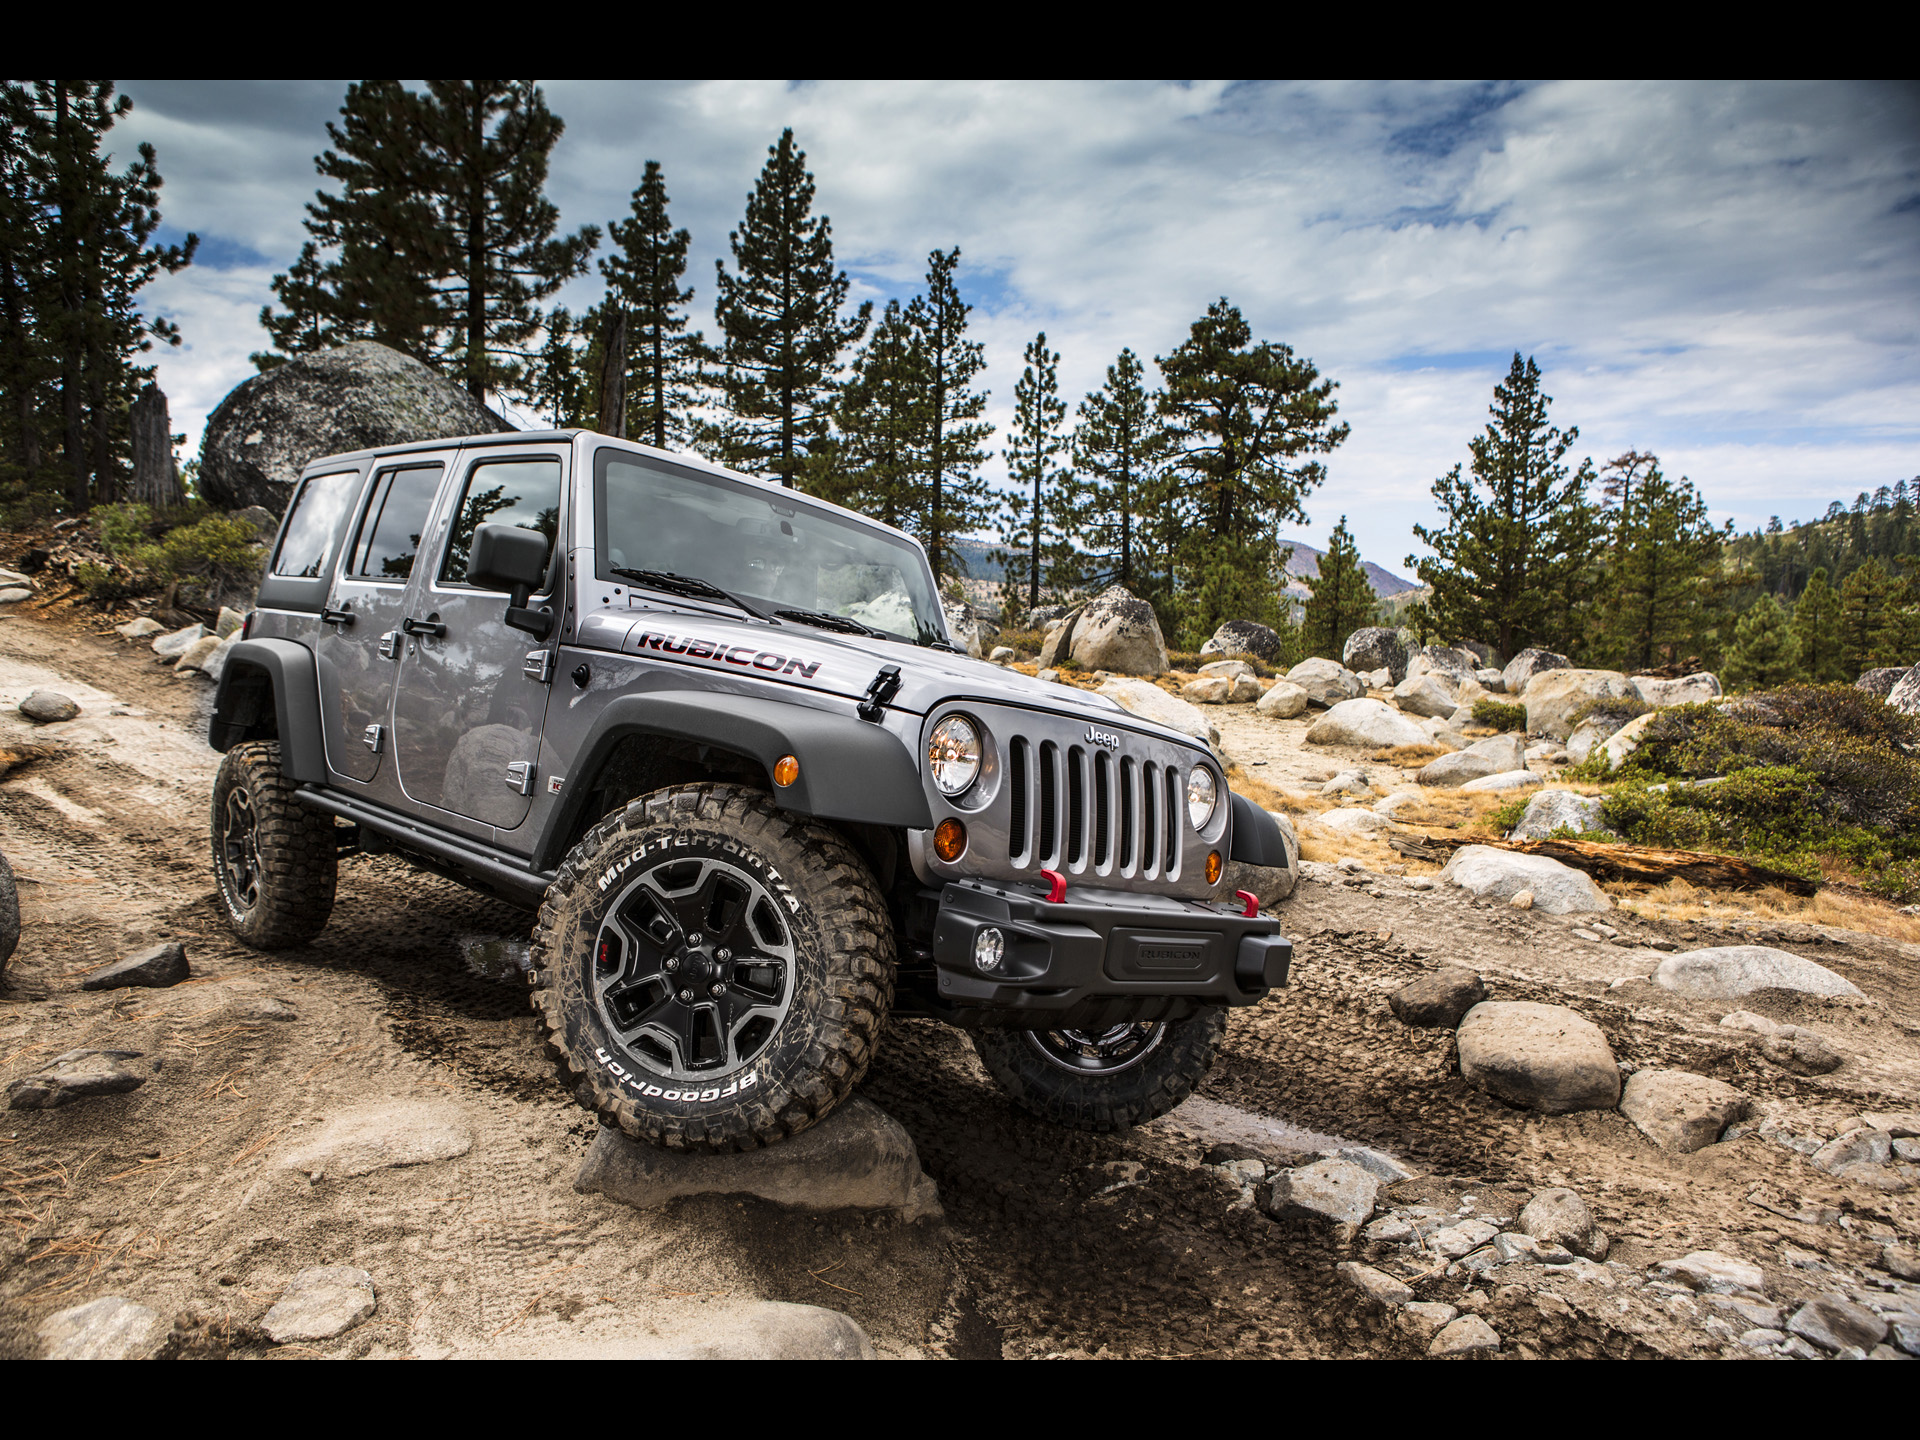 Jeep Wrangler Unlimited Rubicon Wallpaper AUTOMOTIVE REVIEW SITES